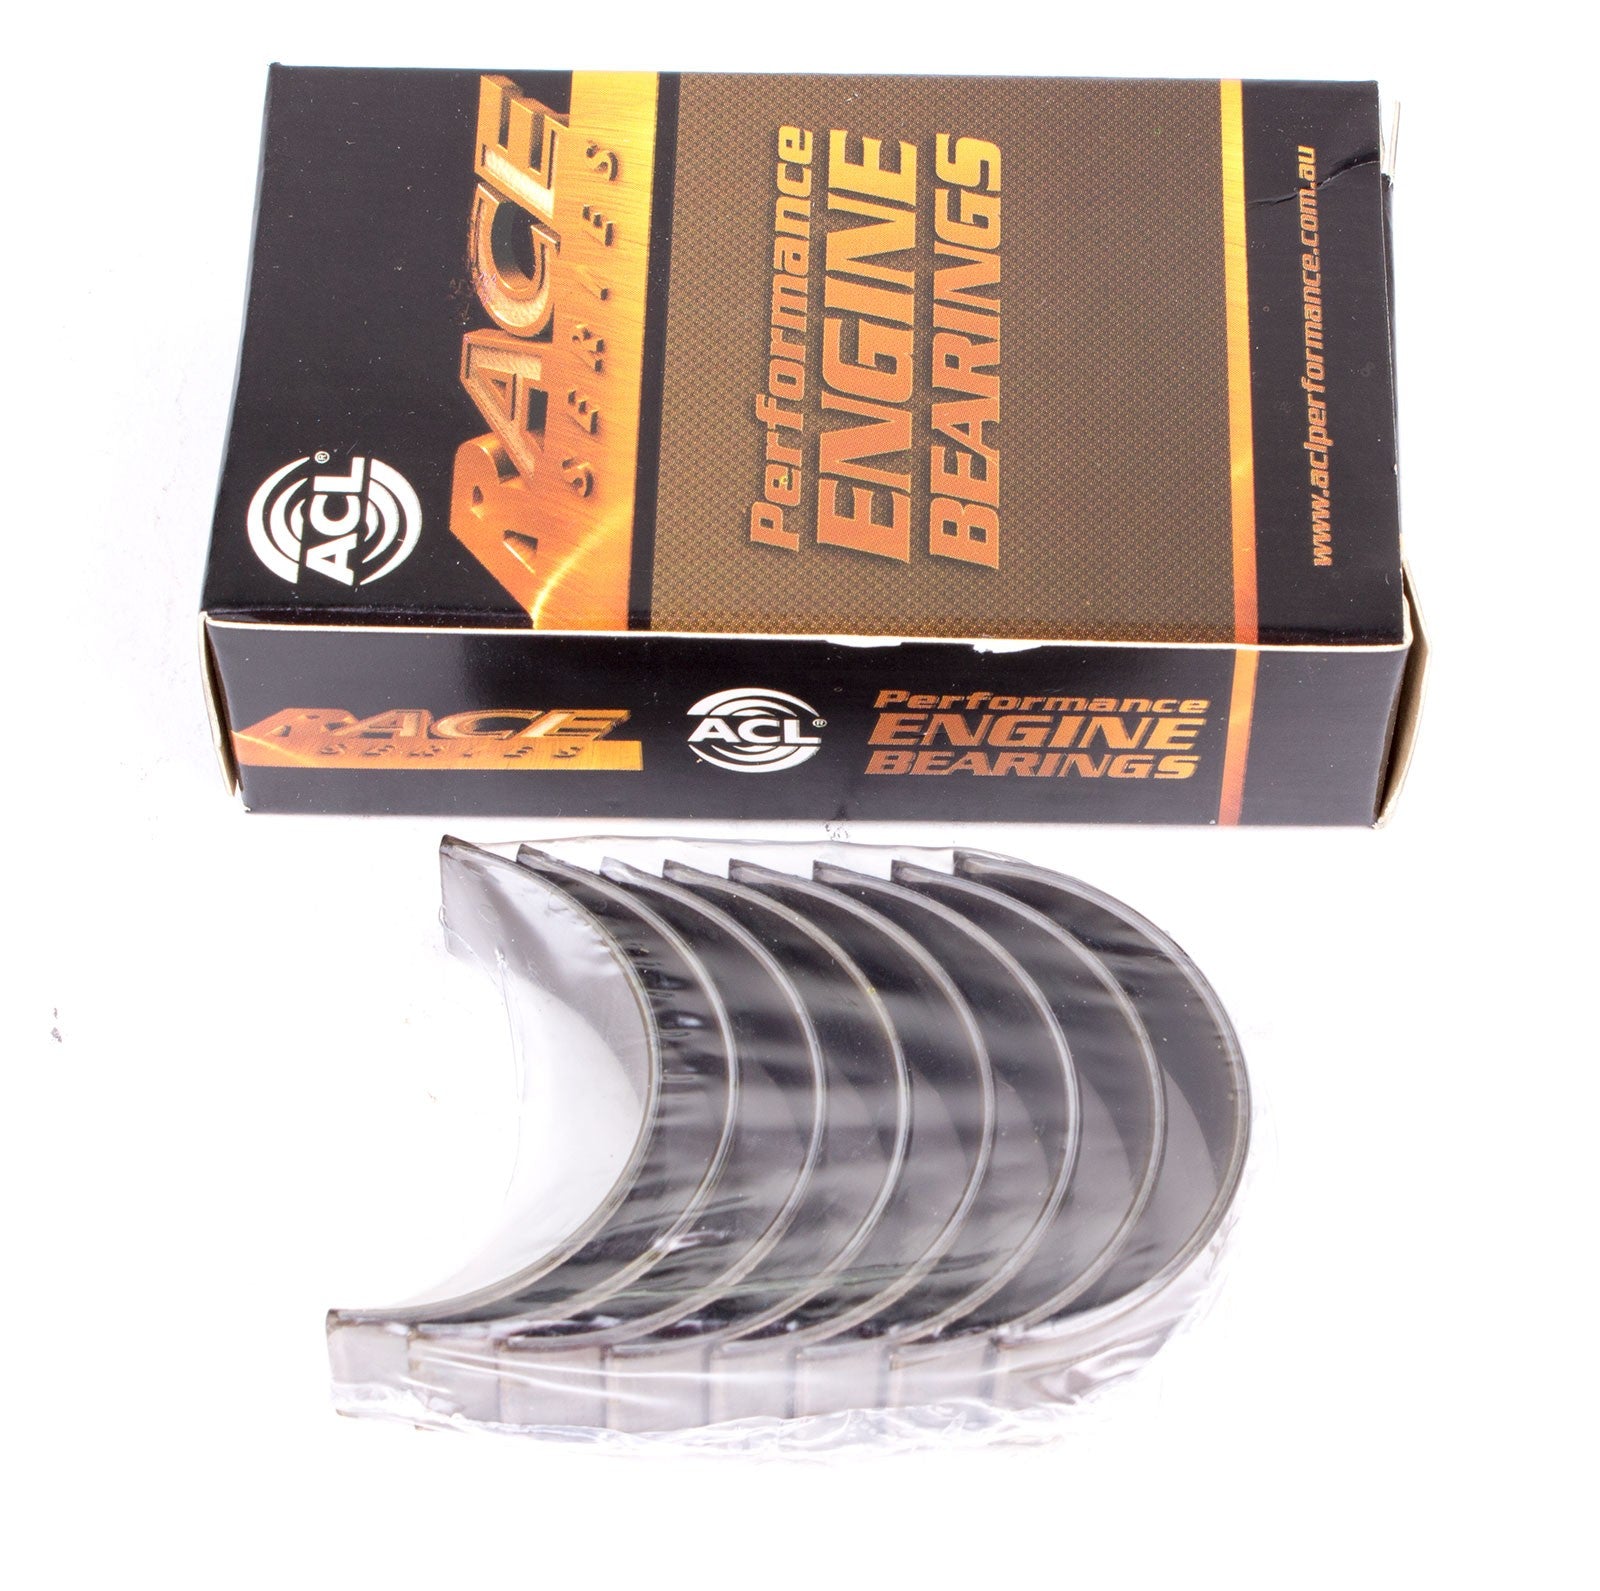 ACL 5M1857H-.025 Main bearing set (ACL Race Series) Photo-0 